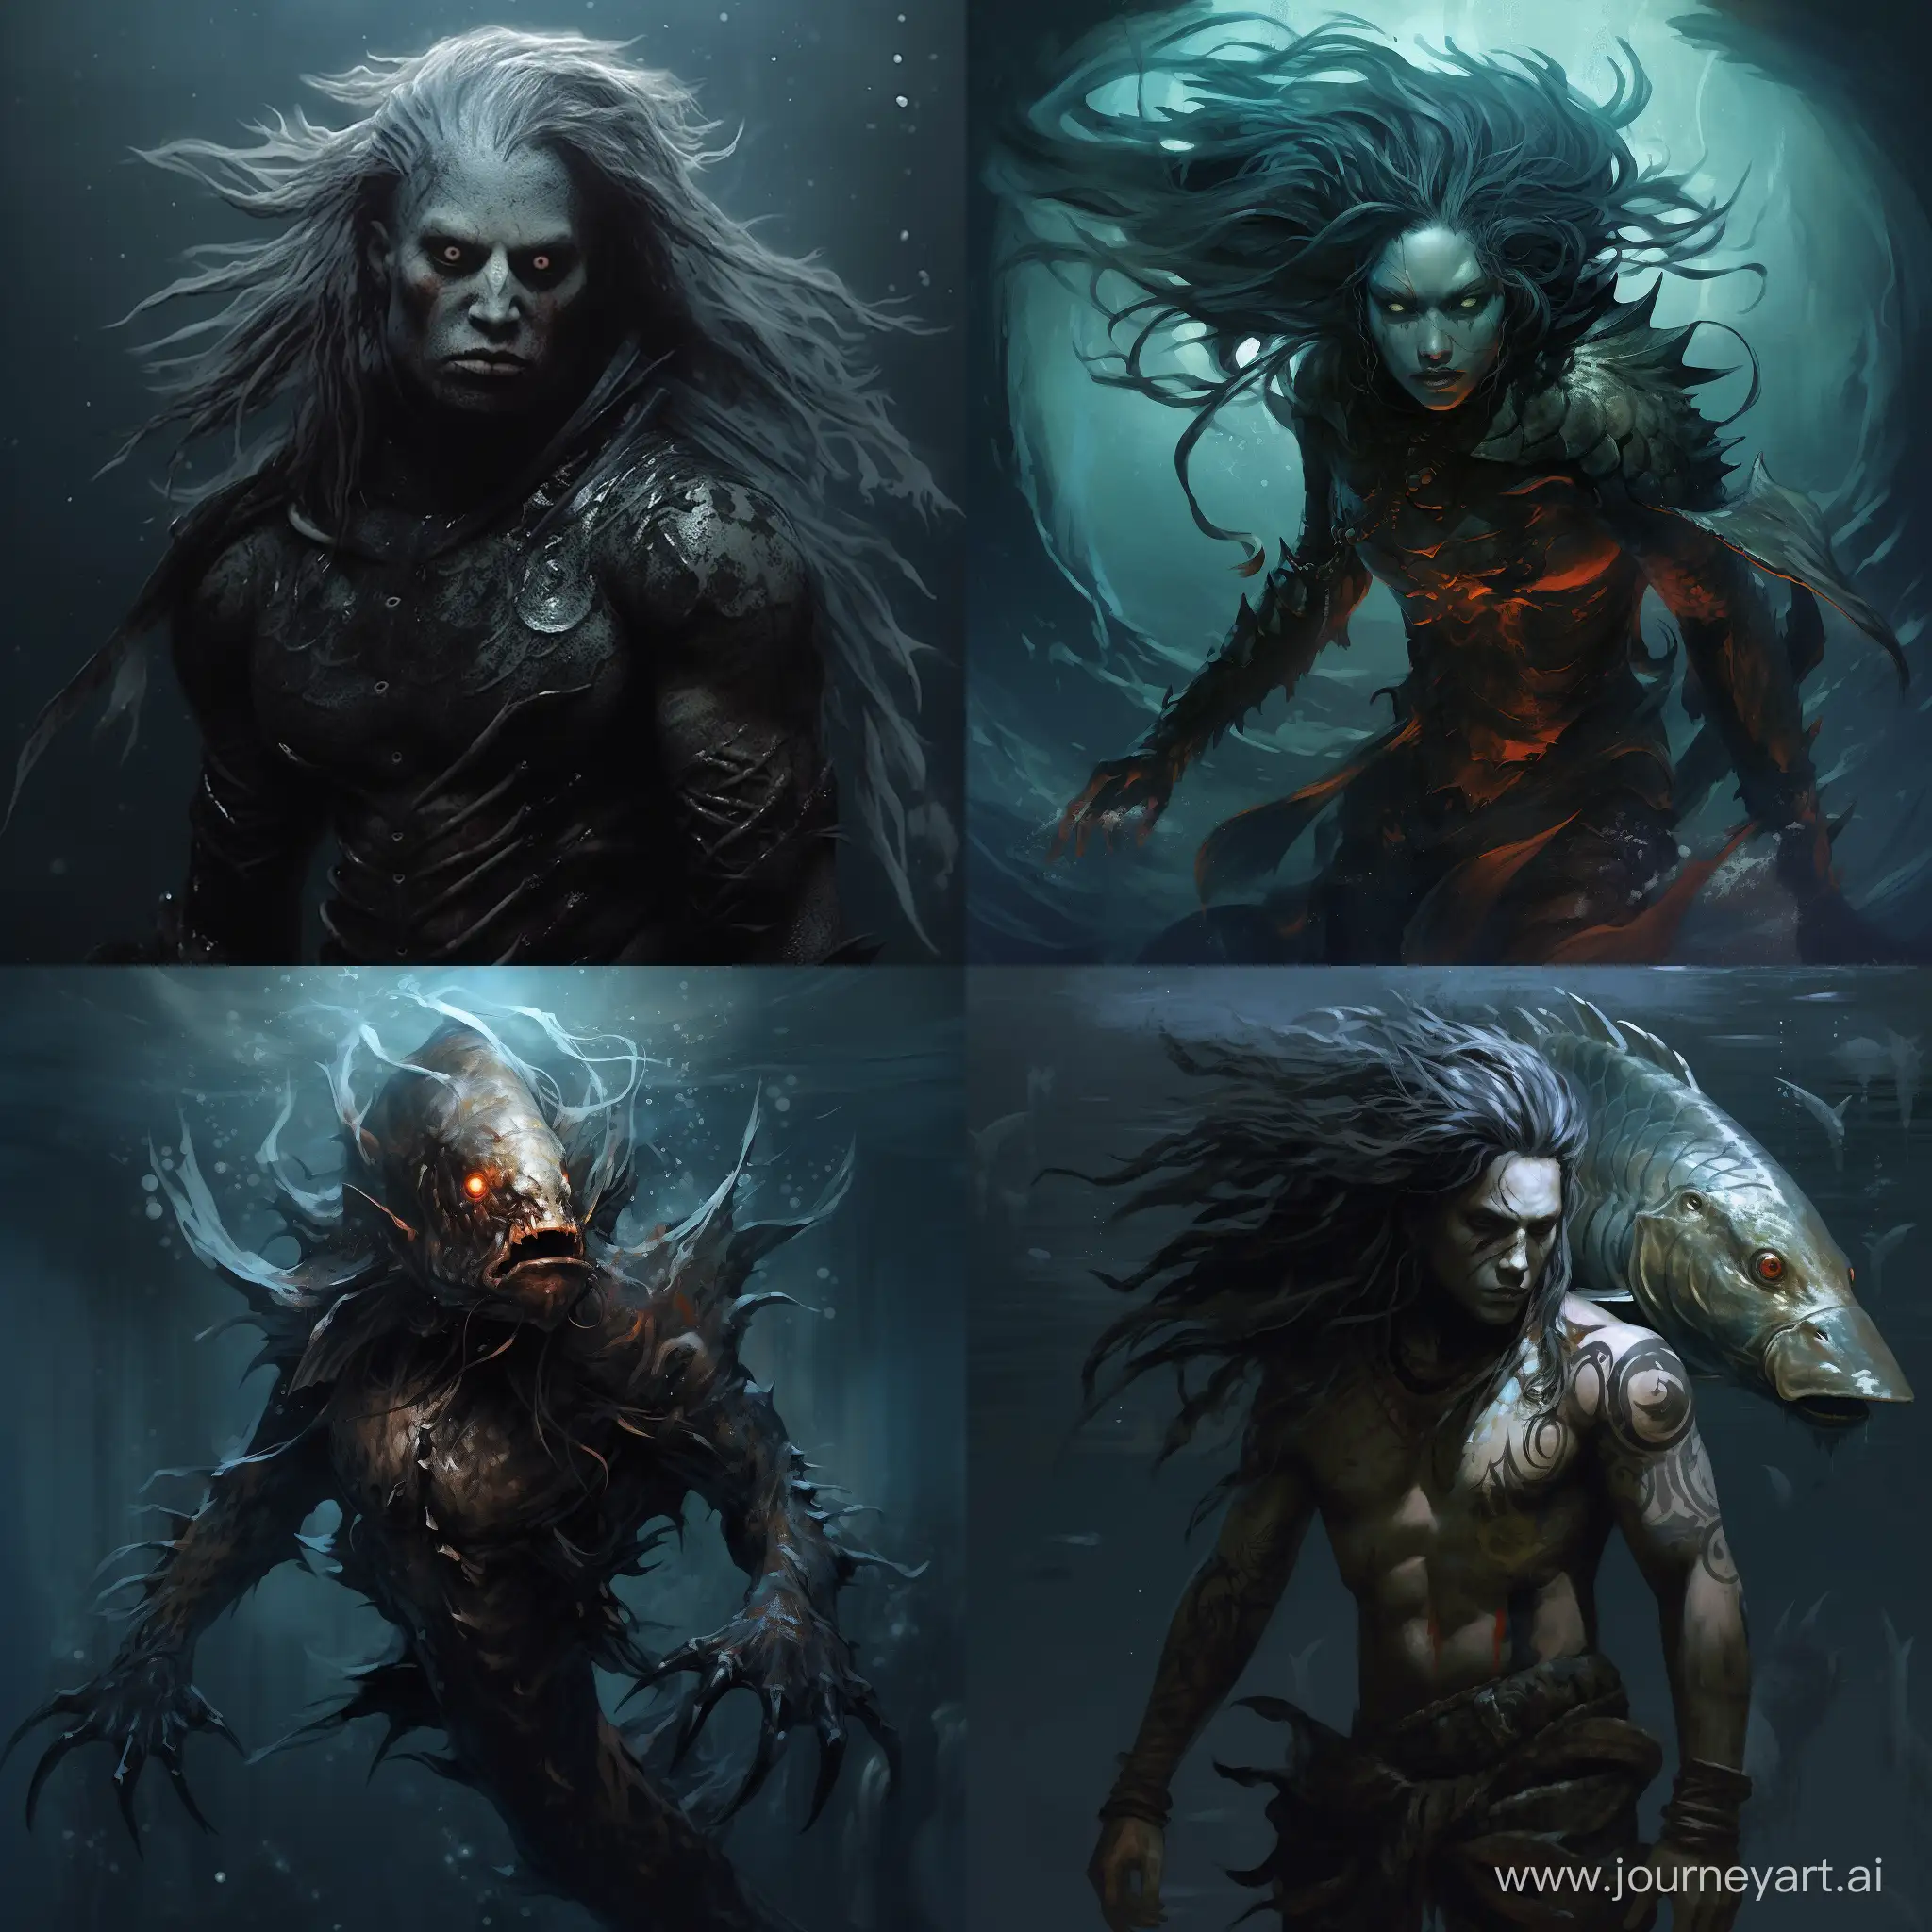 Terrifying-Realism-Pisces-Creature-Emerges-in-Dark-Colors